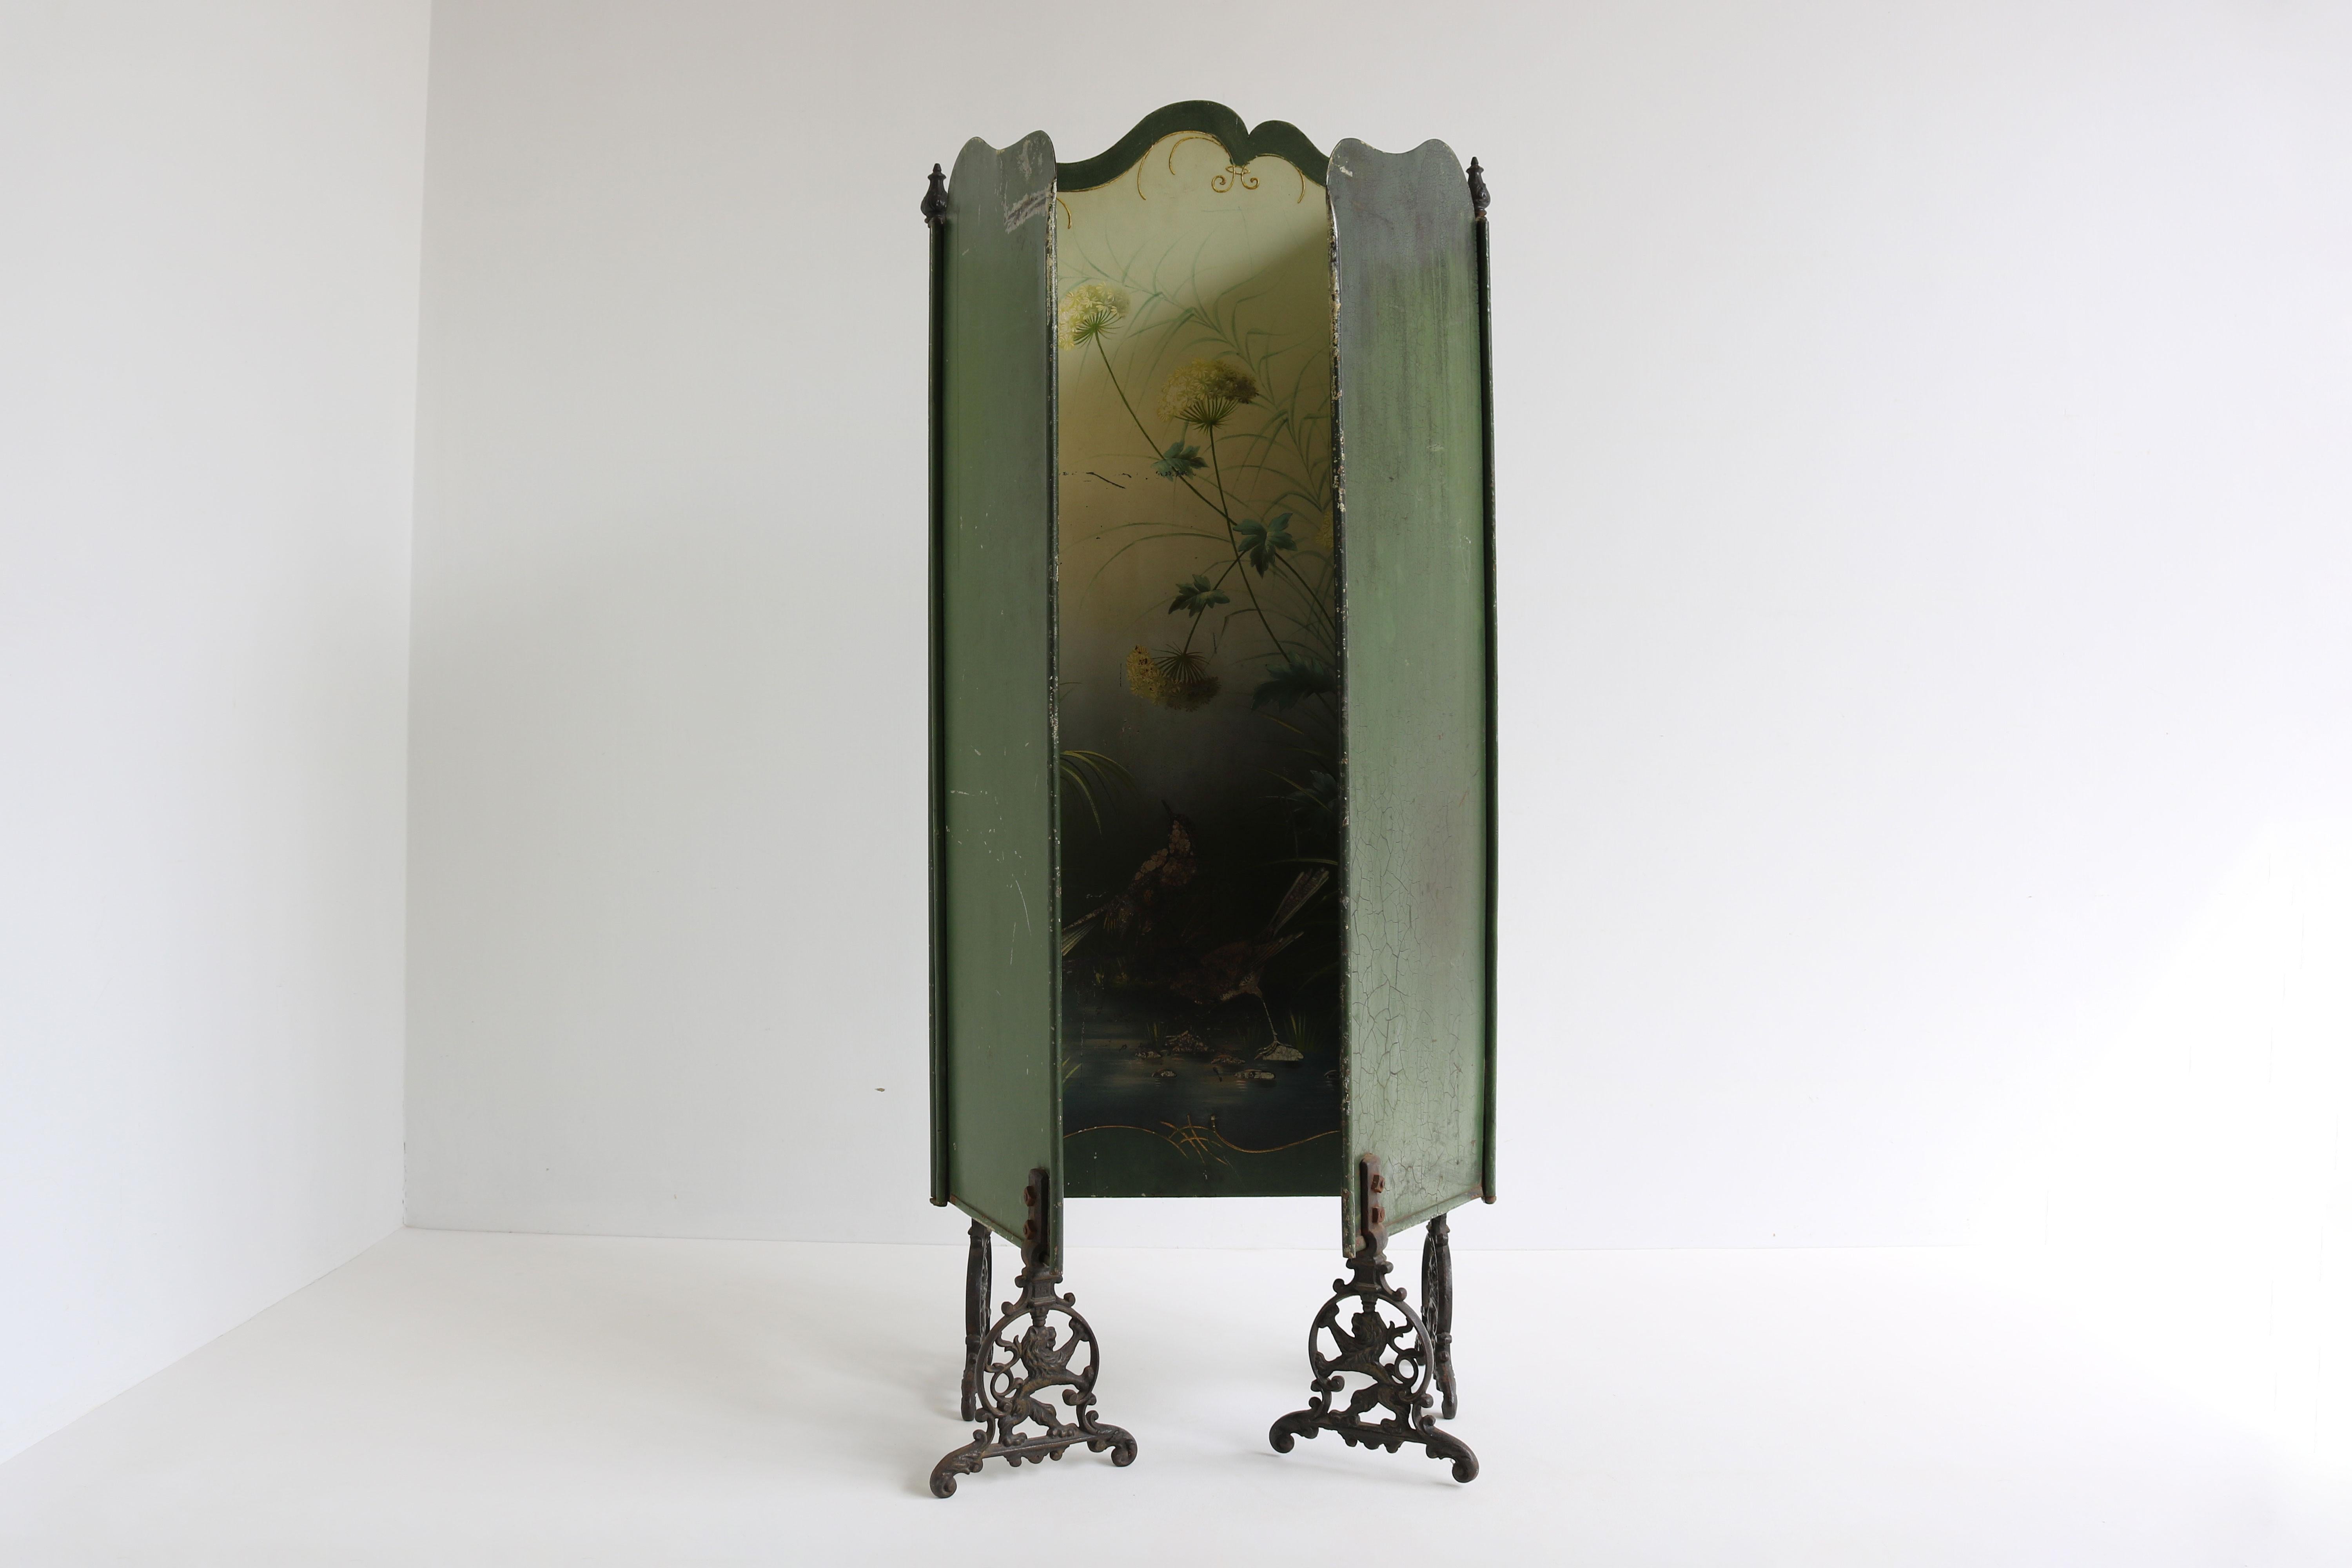 Antique French Art Nouveau Fire Screen 1900 fireplace hand painted jugendstil  For Sale 4